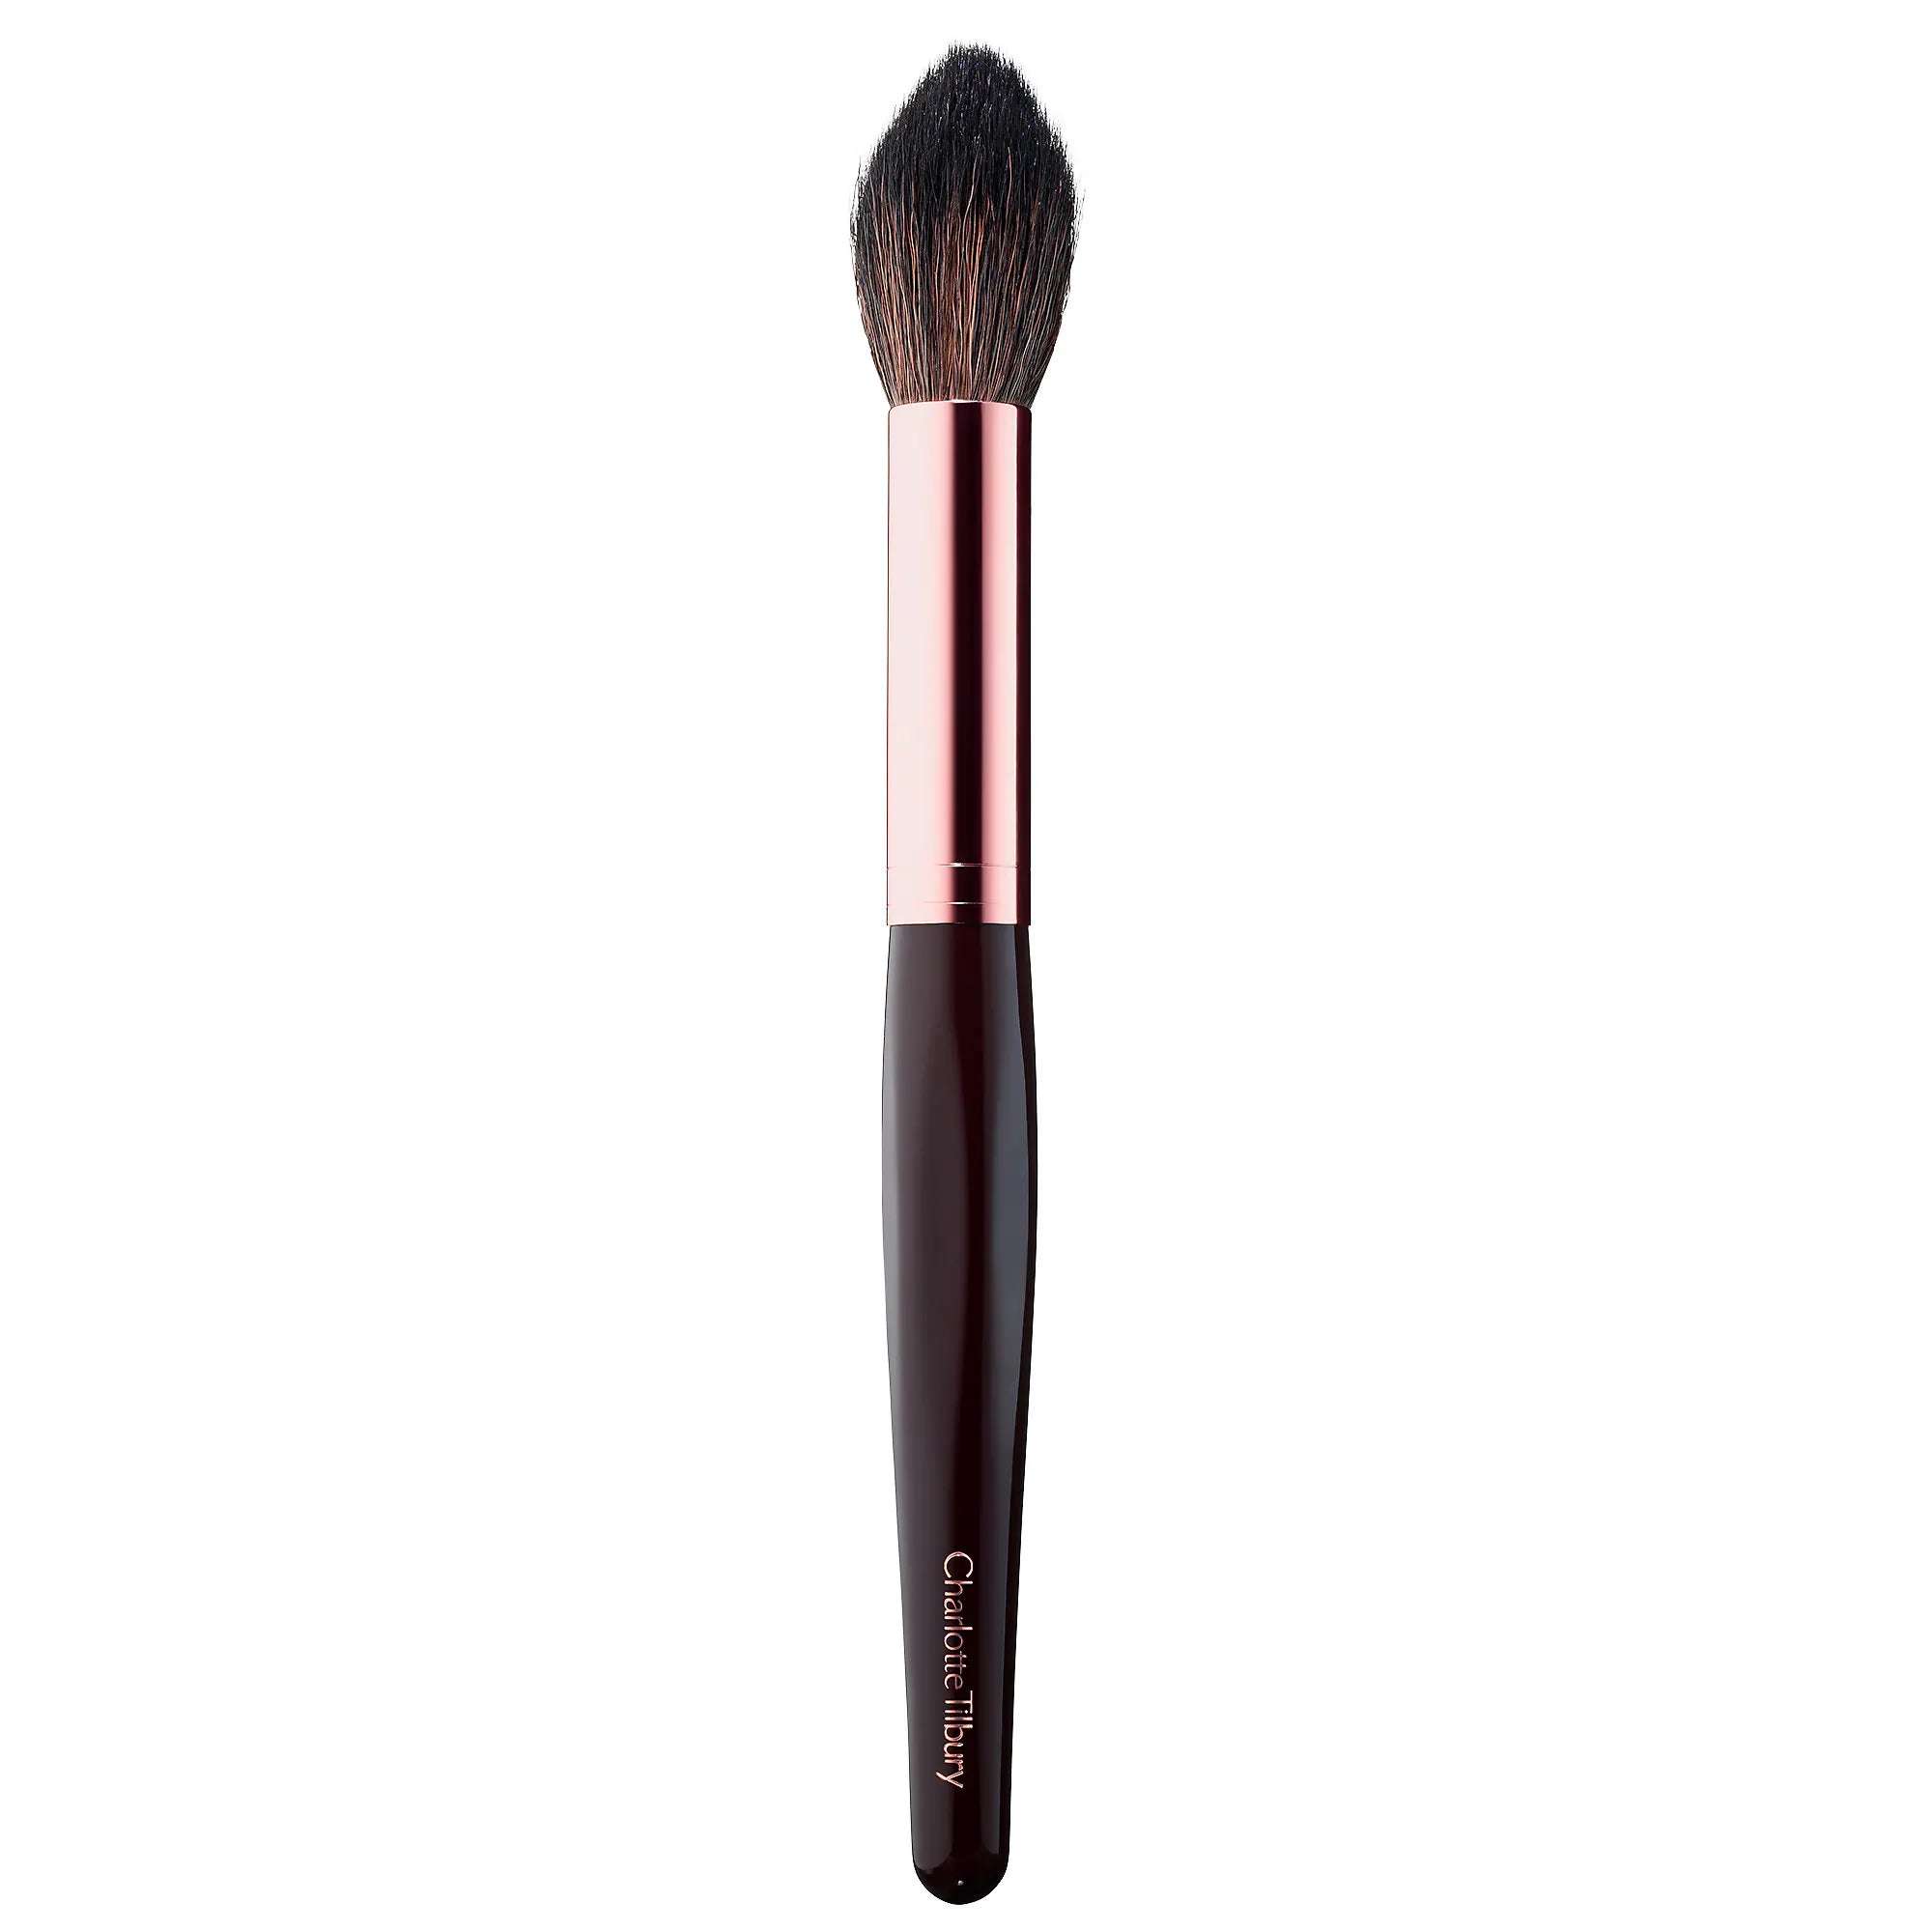 Buy Charlotte Tilbury Powder & Sculpt Brush here at 70% discount! Branded  makeup brushes at outlet prices. Worldwide shipping in 7 working days! –  Pony Brushes